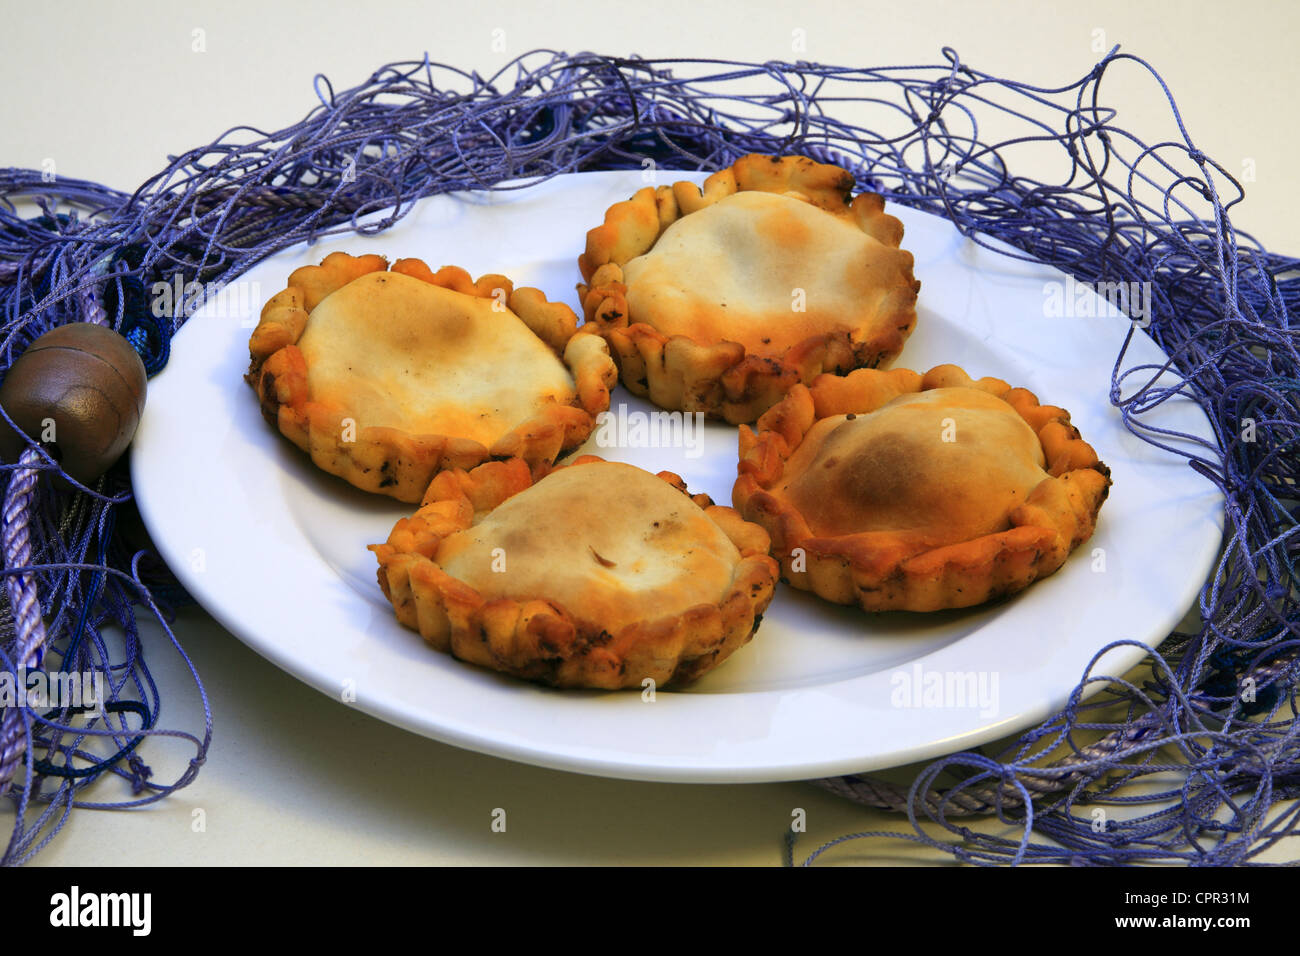 The Tielle Setoise is the famous dish of the city of Sete, Languedoc Roussillon, France. Stock Photo